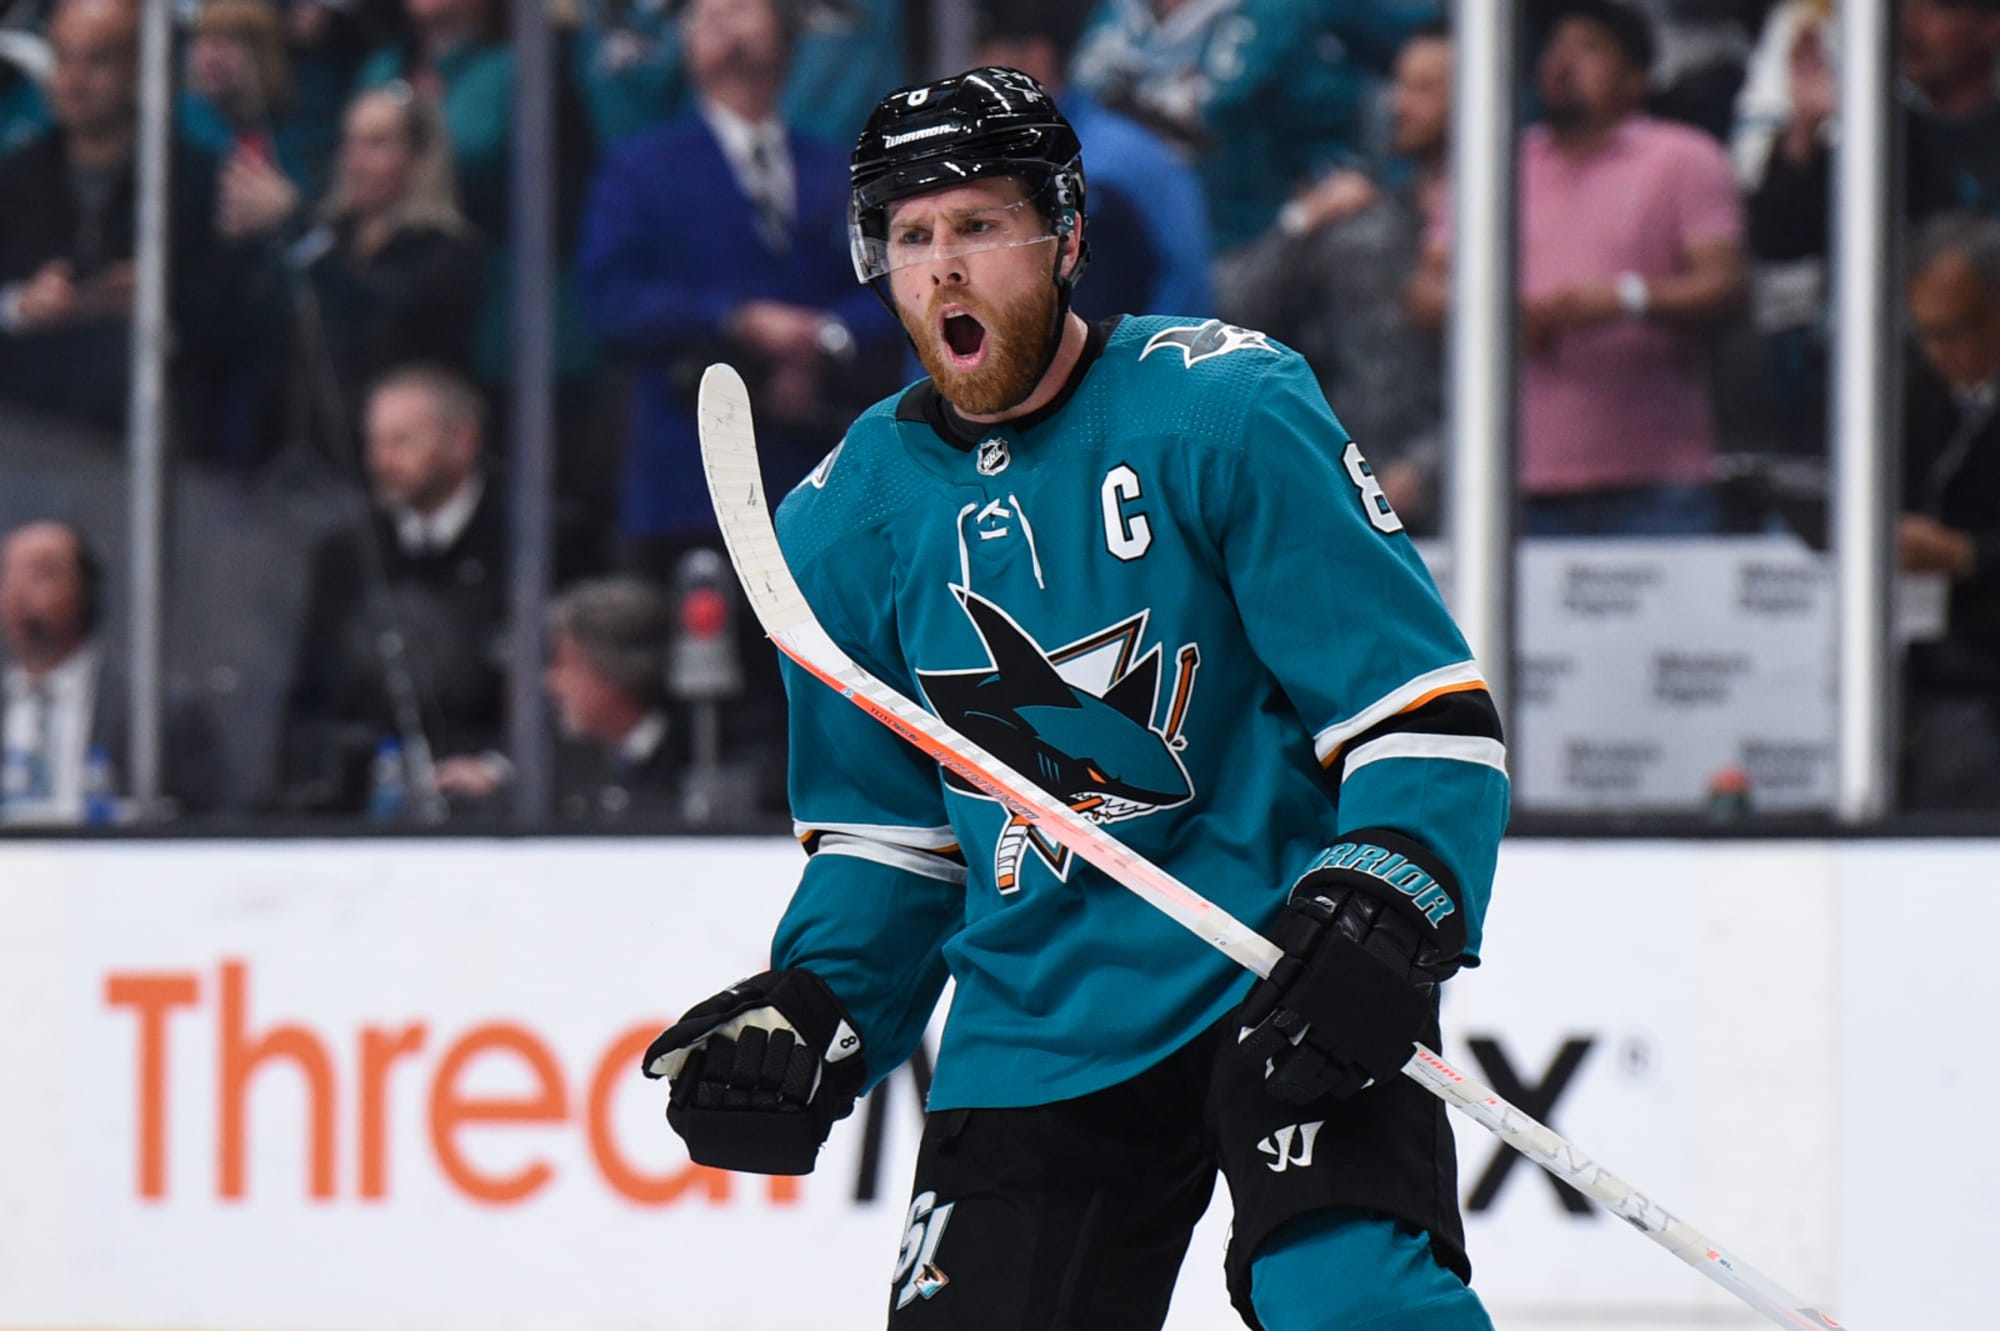 Joe Pavelski Sparks the Sharks, Whether He's on the Ice or Not